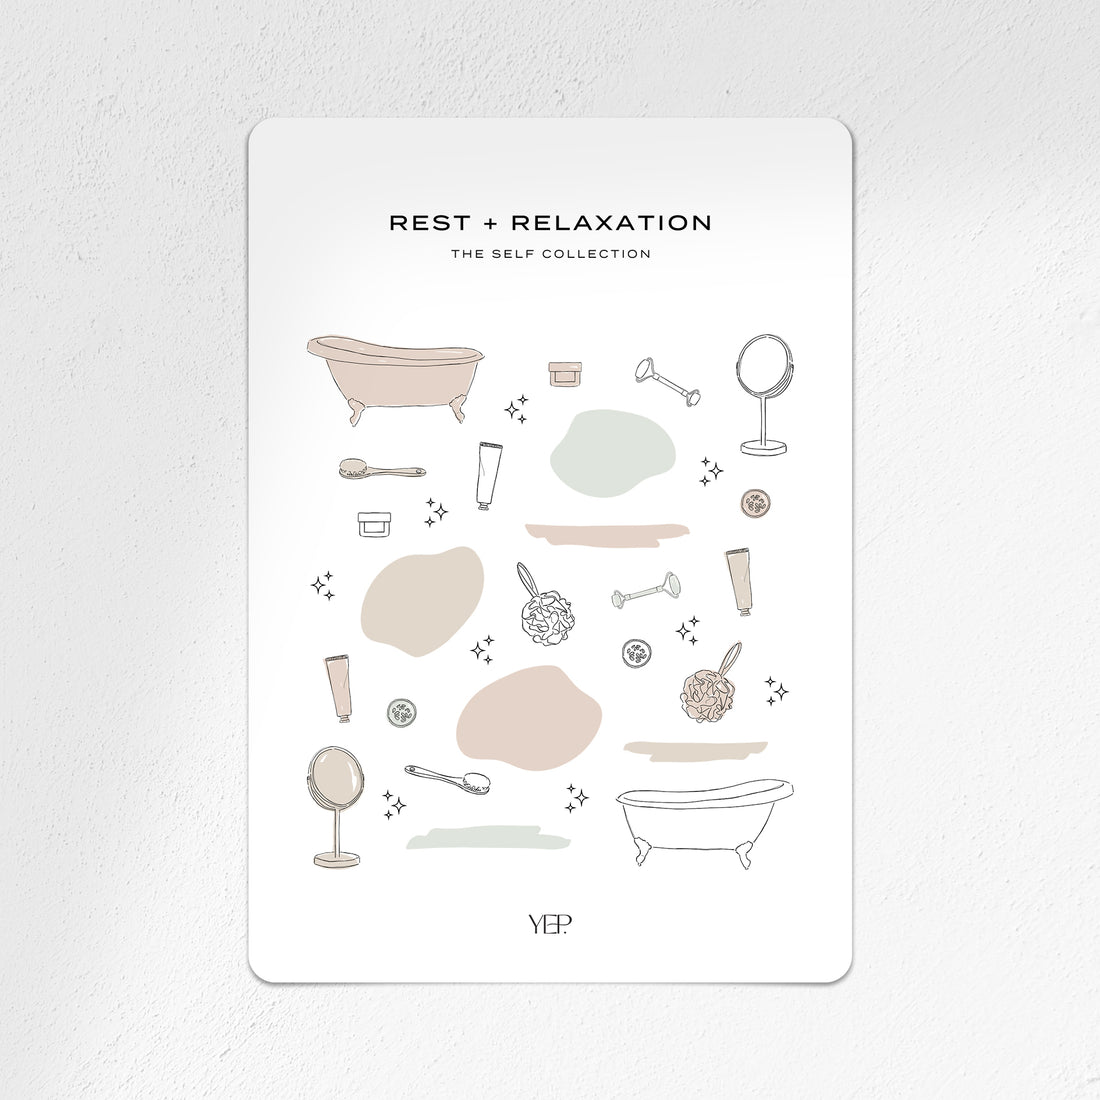 Rest + Relaxation | The Self Collection